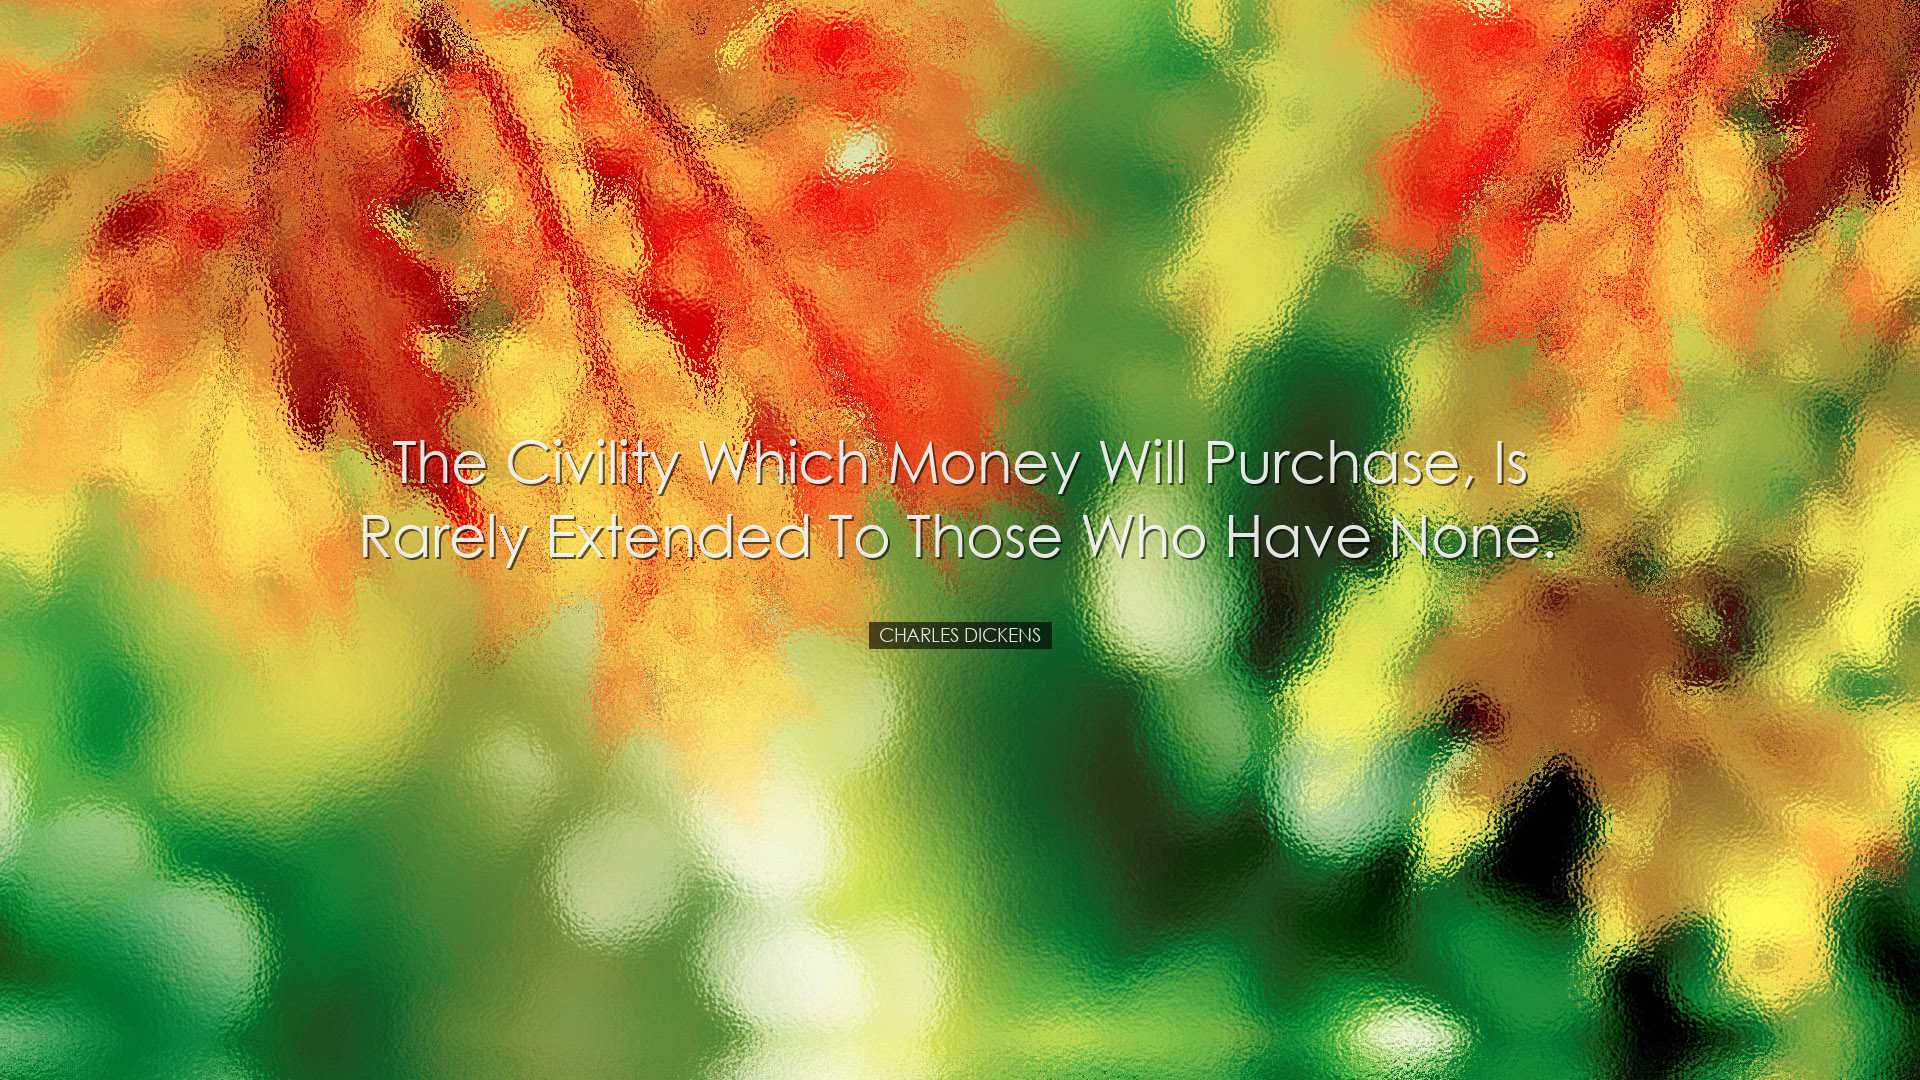 The civility which money will purchase, is rarely extended to thos